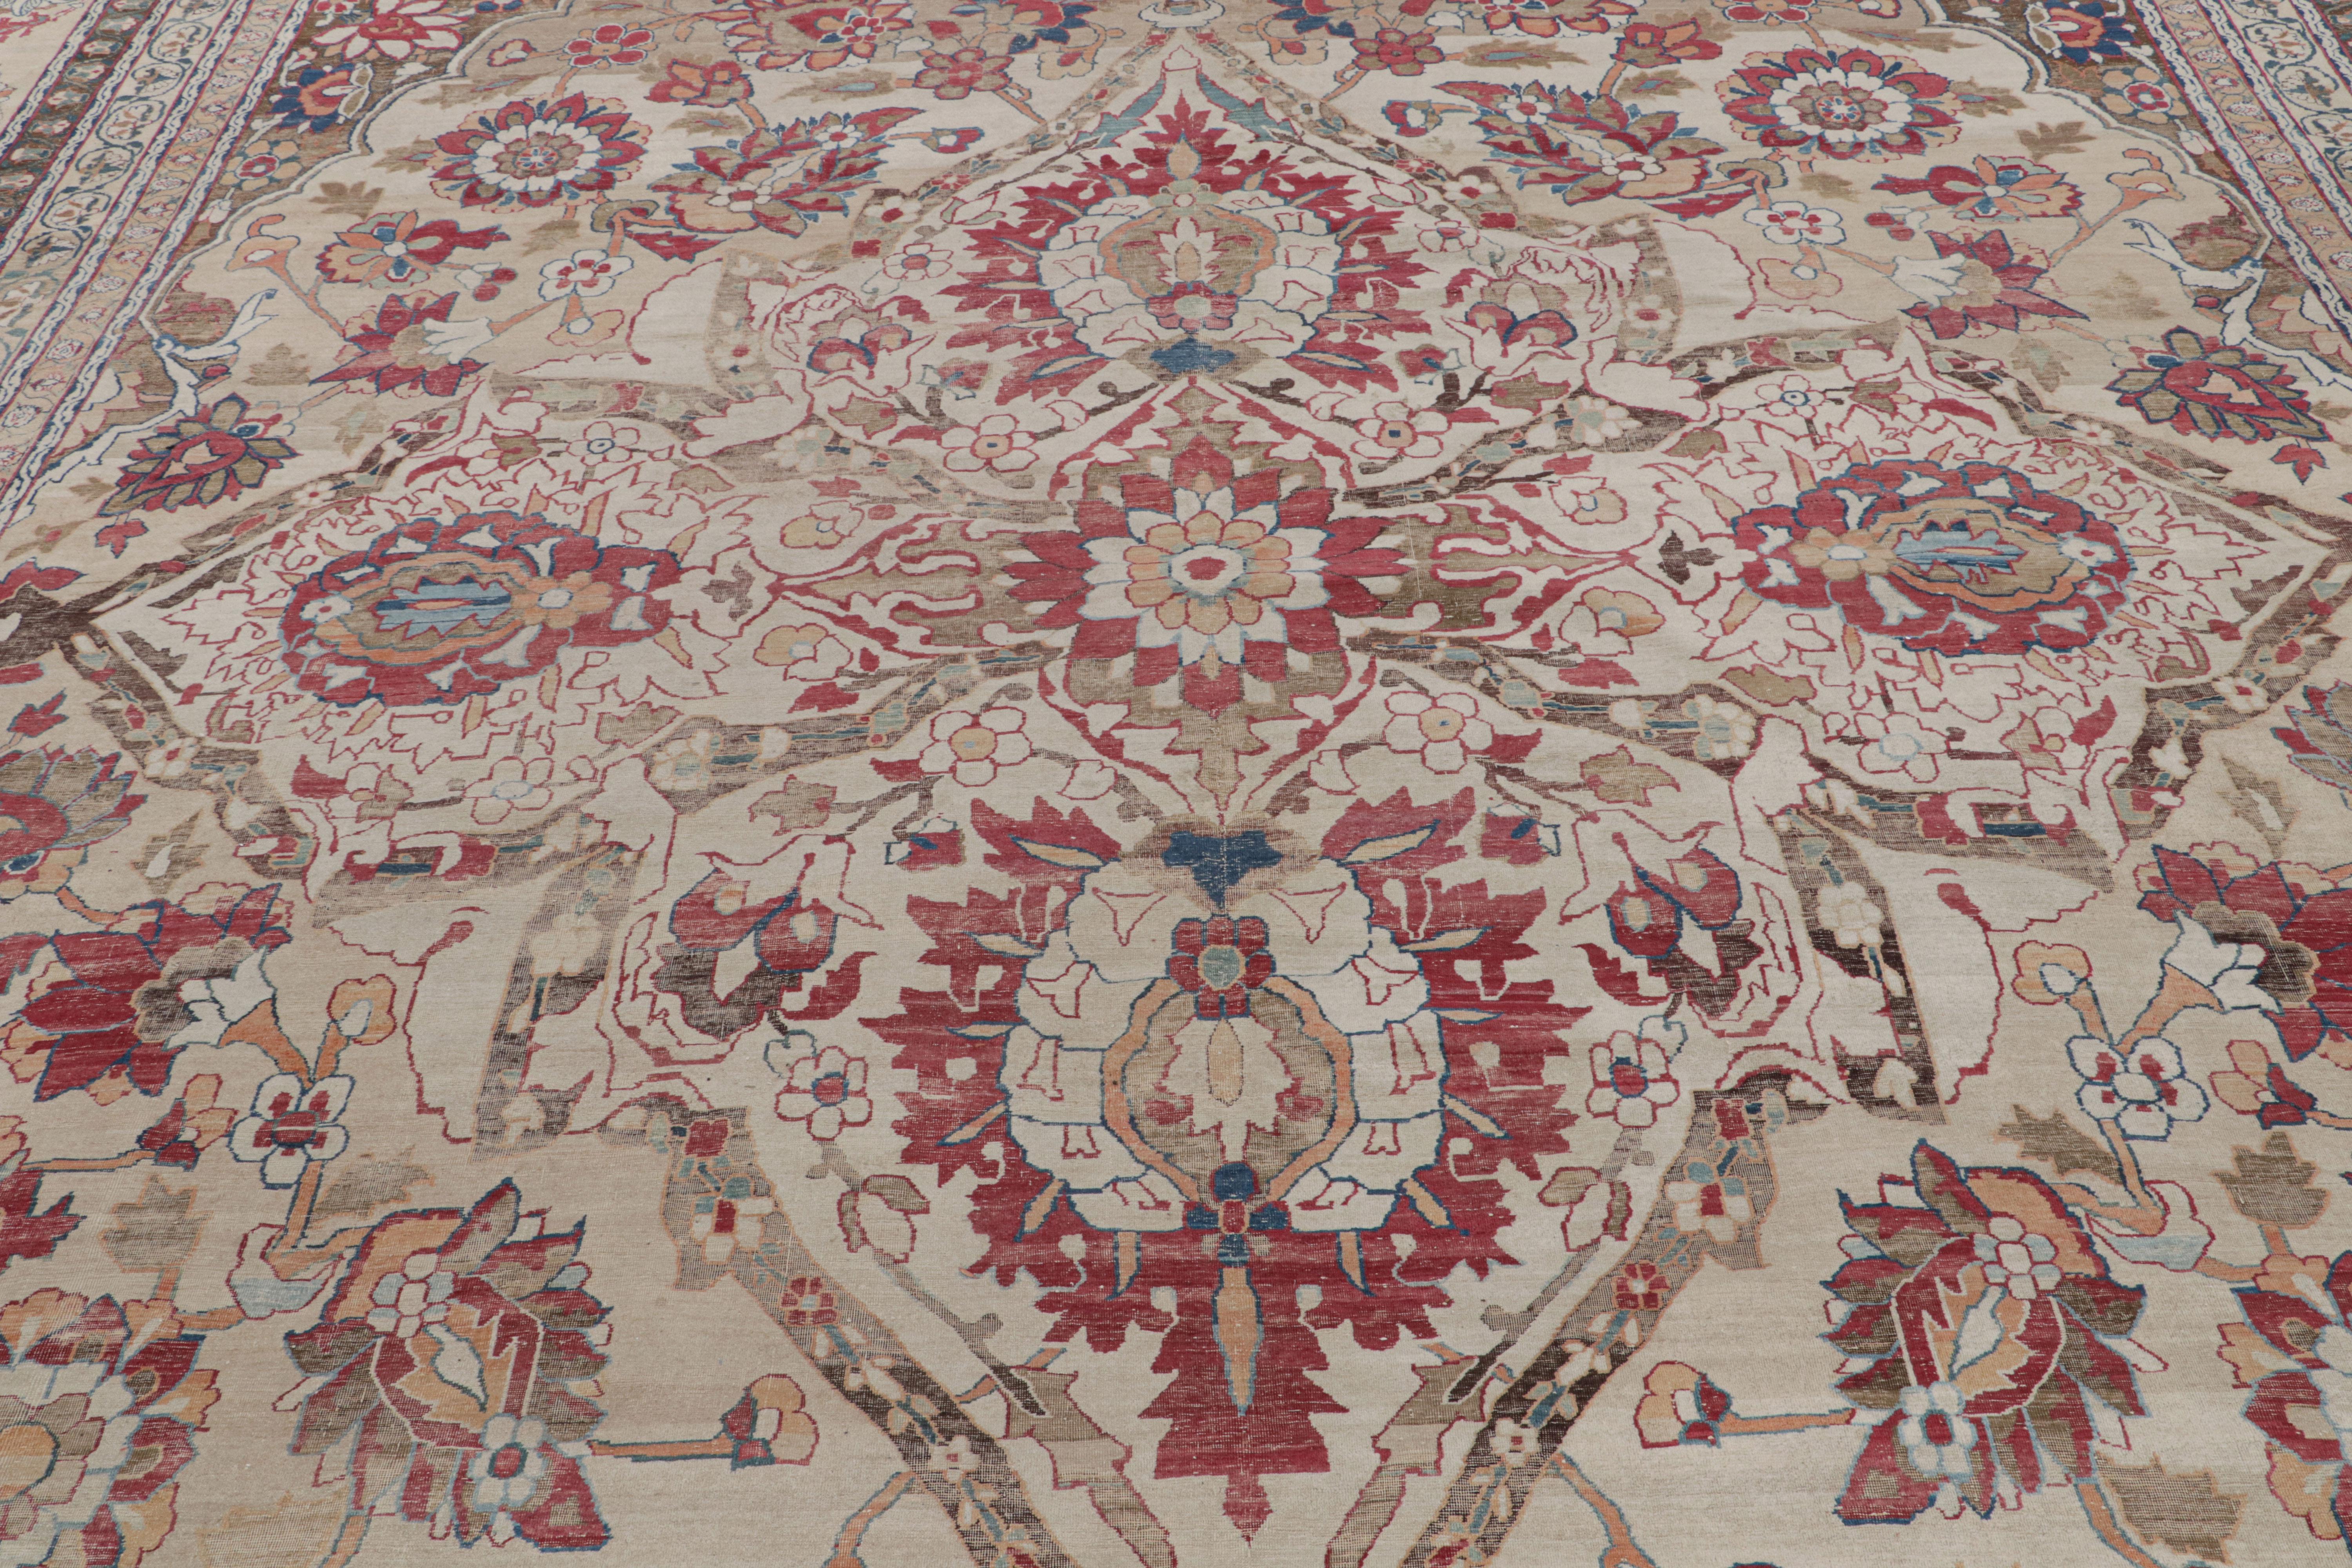 From our antique collection, this 13x19 oversized rug is a rare antique Persian rug of Kermanshah provenance—hand-knotted in wool circa 1890-1900.

On the Design

Beige-brown and red tones underscore floral patterns in the all over style. Keen eyes